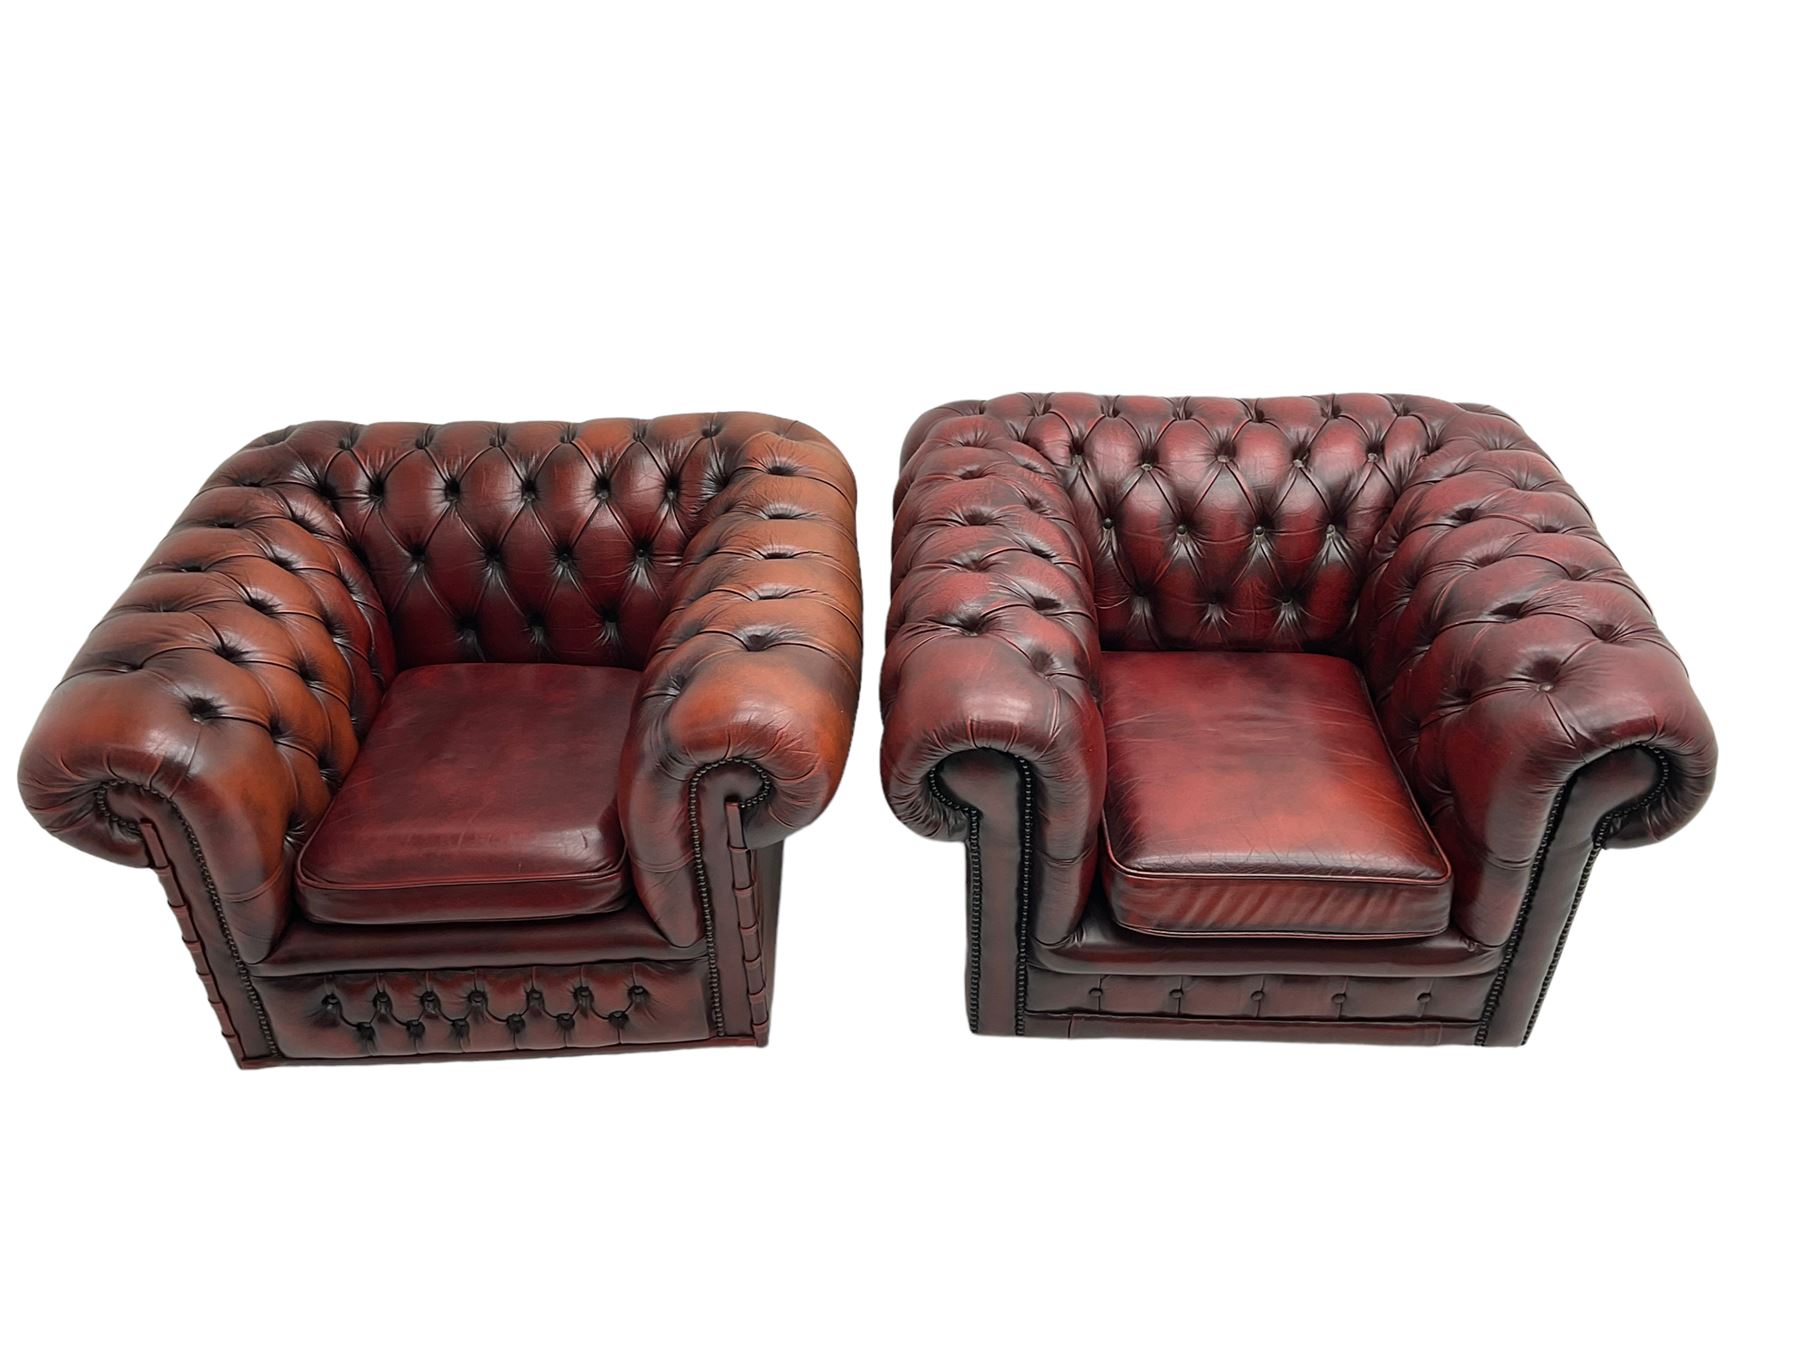 Pair chesterfield armchairs in oxblood leather - Image 7 of 7